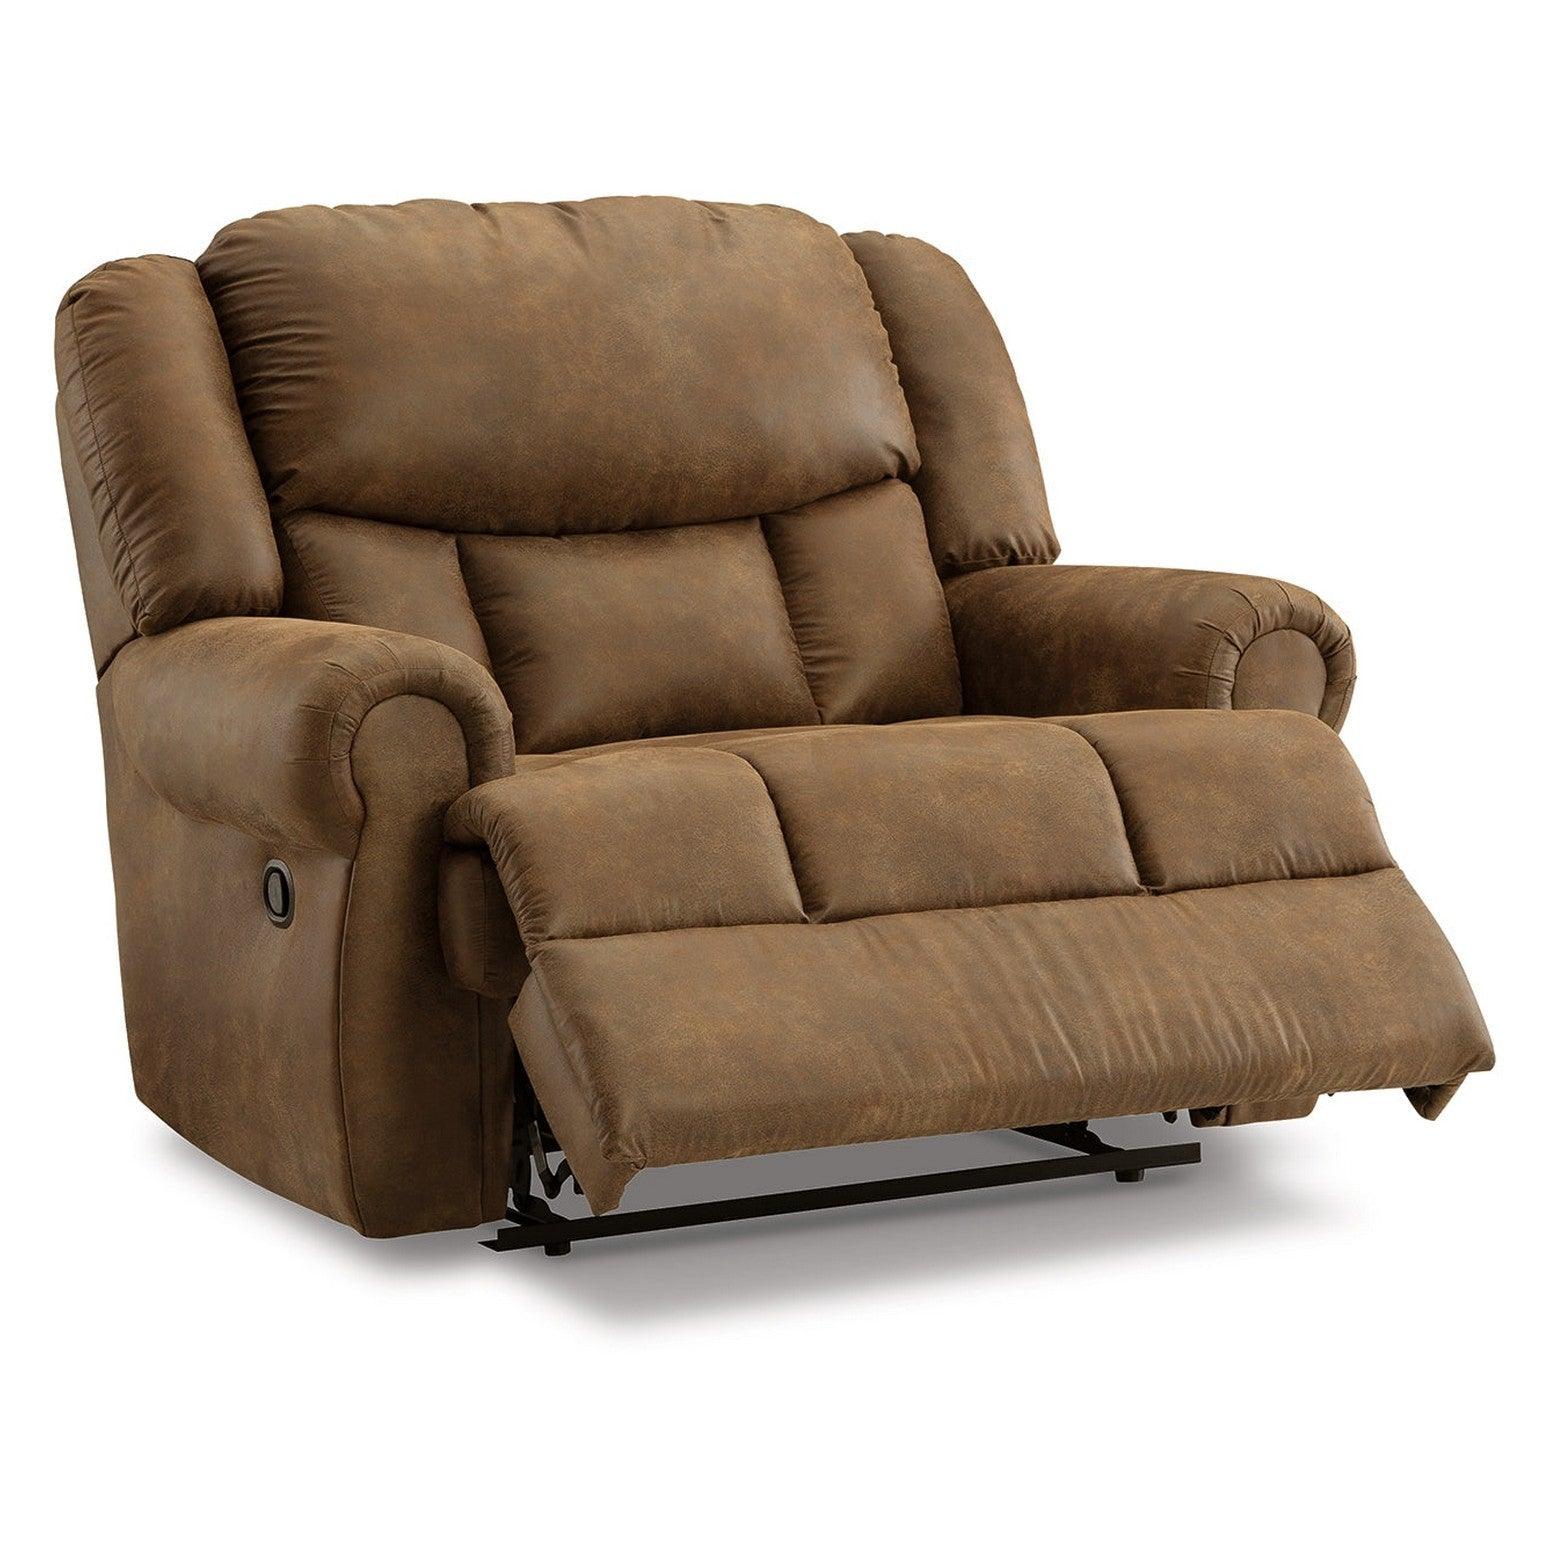 Hanford Recliner - Leather